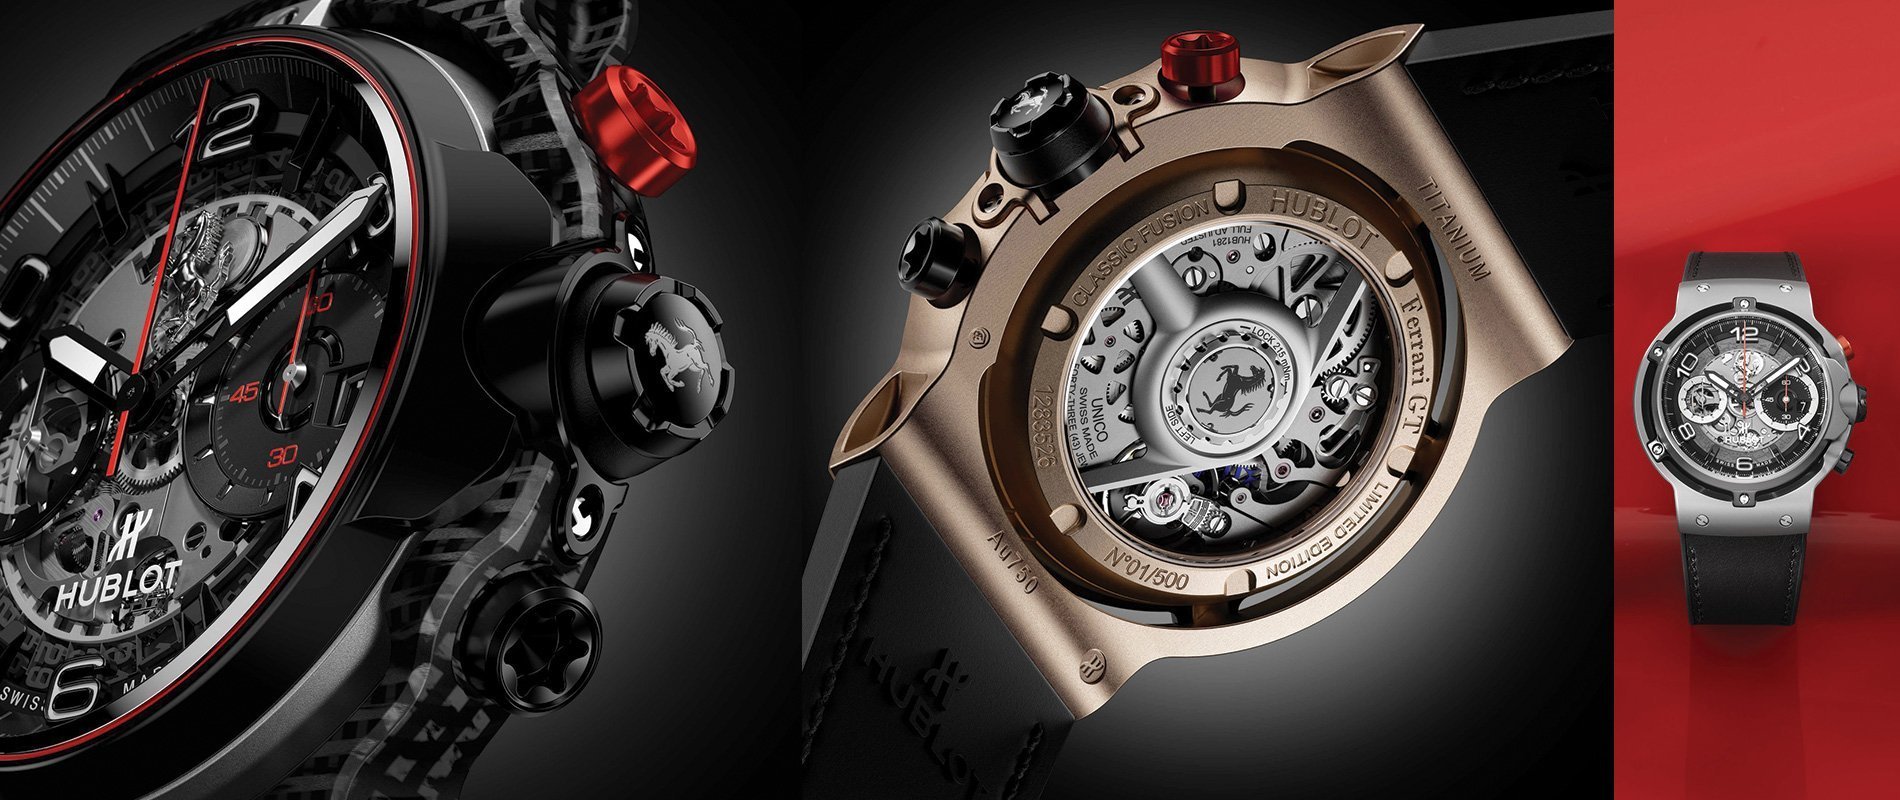 Hublot And Ferrari Open A New Chapter In Their Collaboration With The Classic Fusion Ferrari Gt Watch